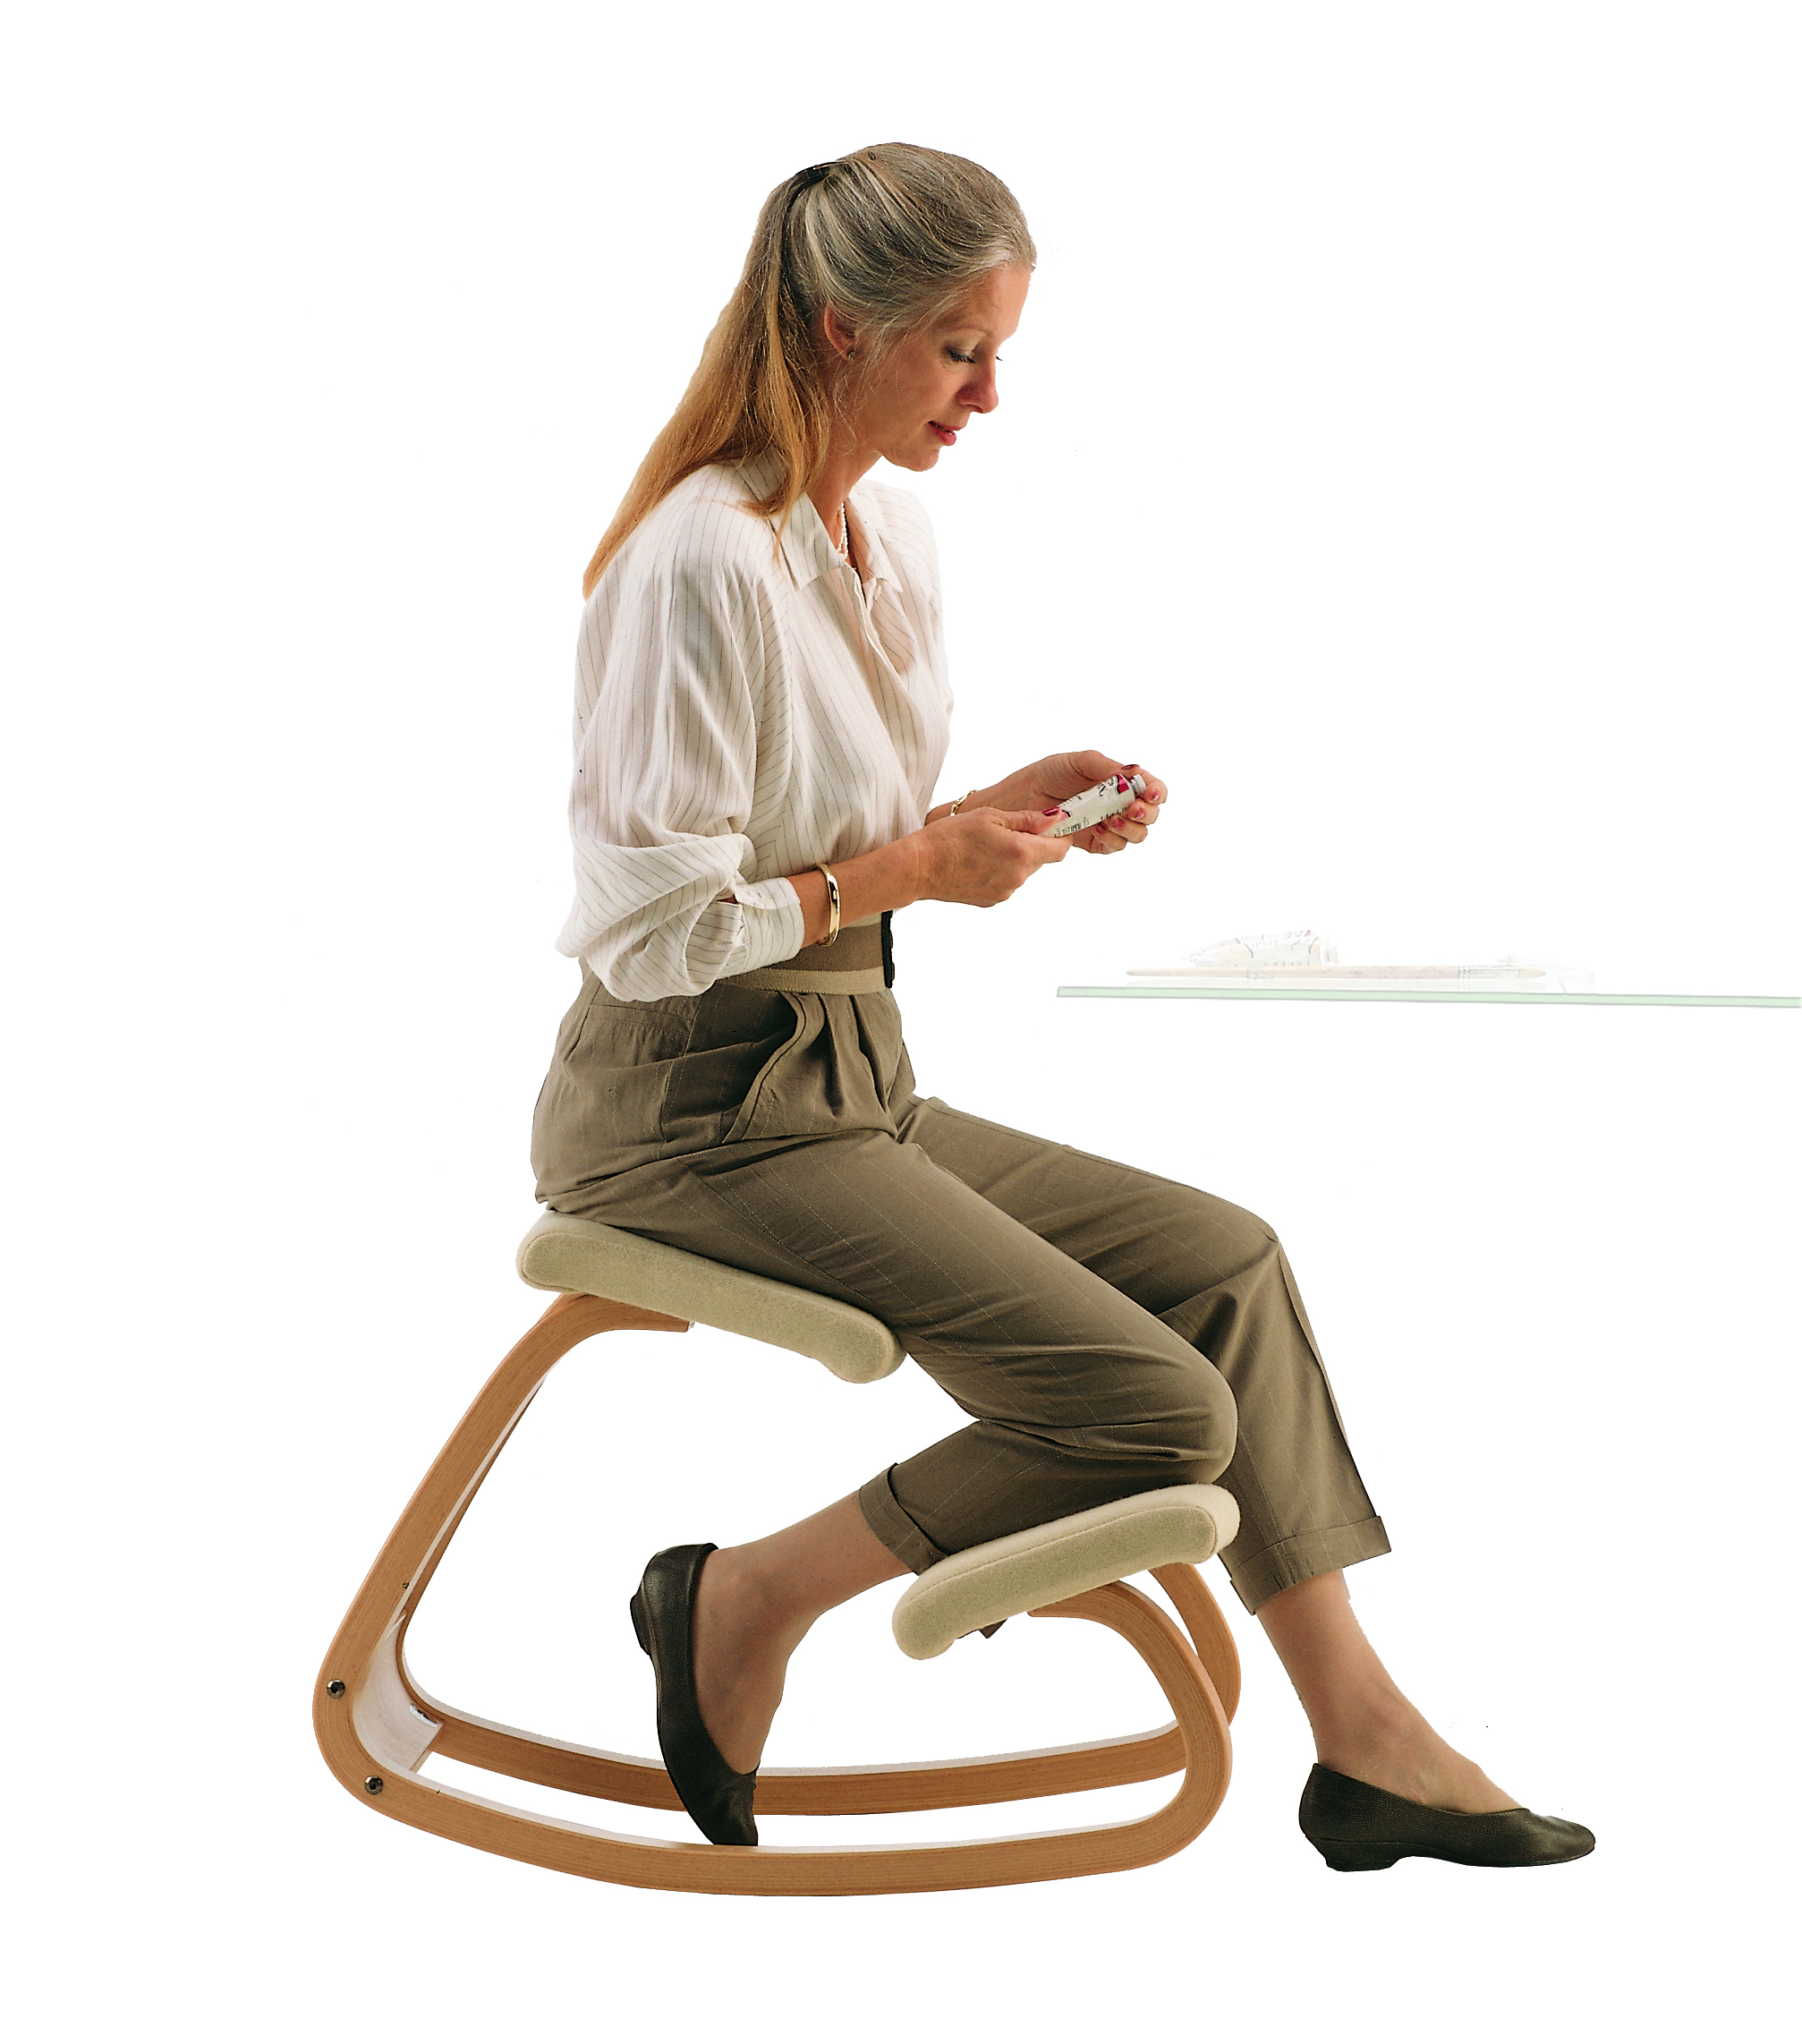 Variable chair with woman